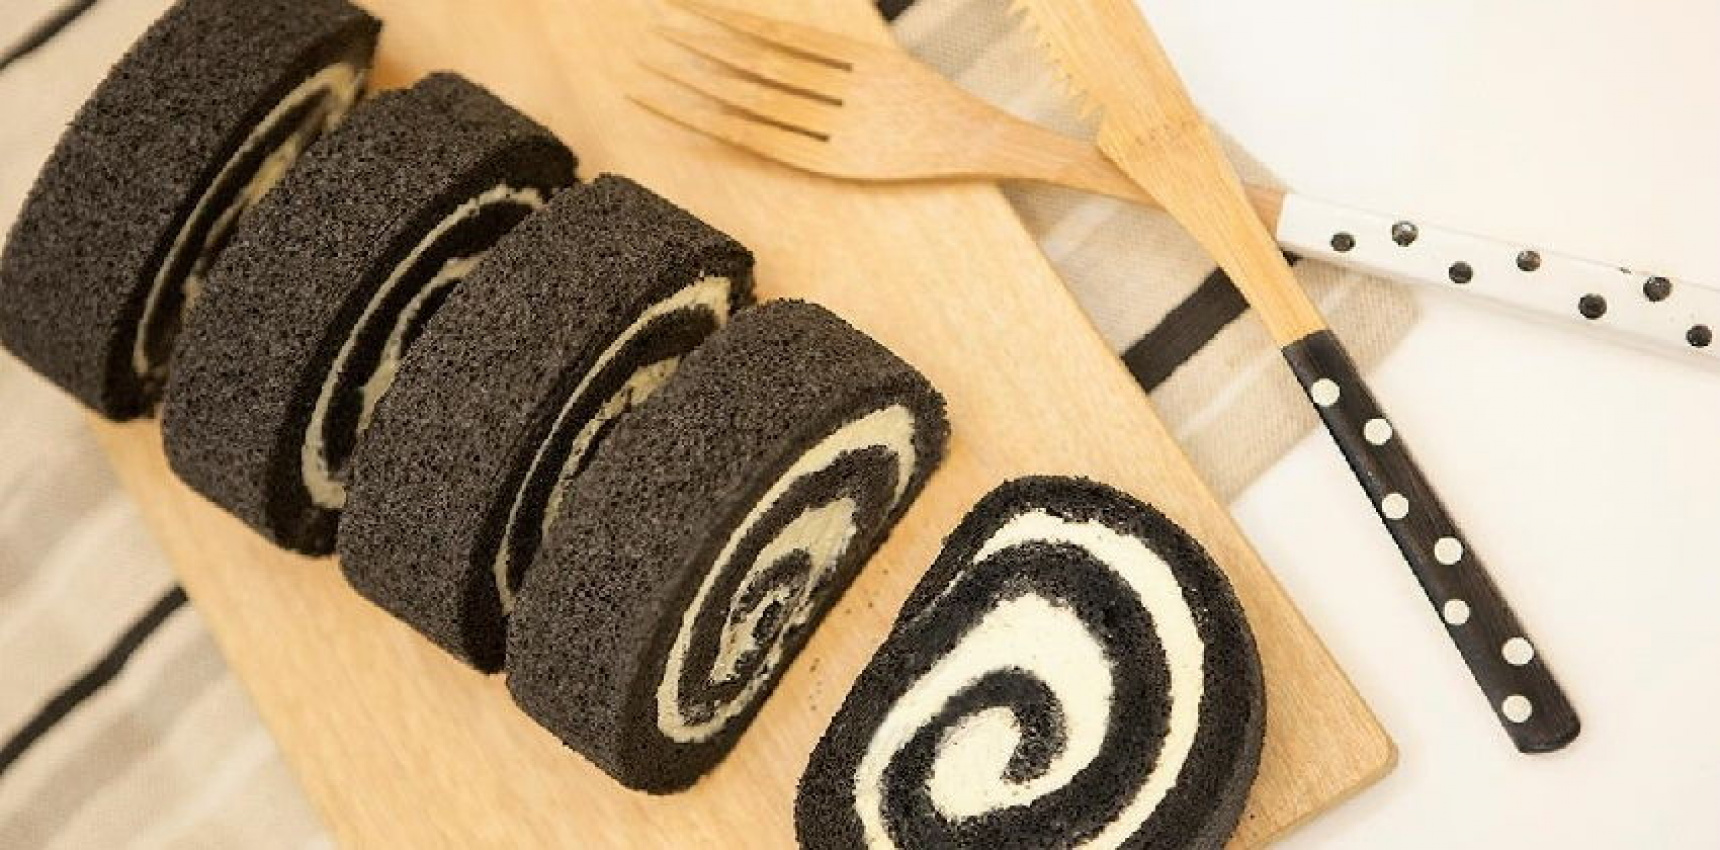 Three types of “dark” but deliciously irresistible cakes from bamboo charcoal